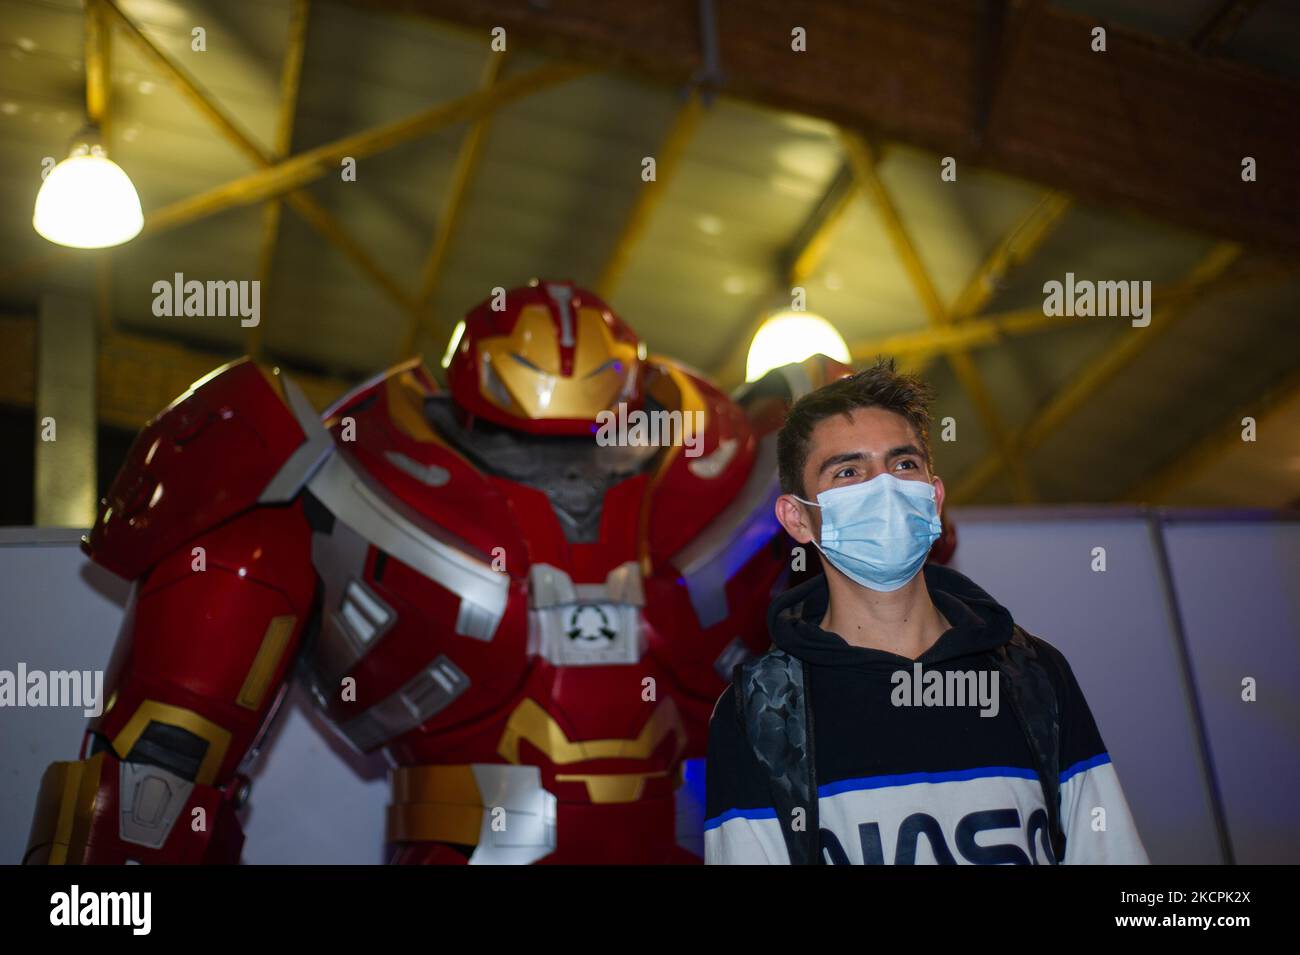 An attendee takes a photo with an Marvel Comics Iron Man suit during the first day of the SOFA (Salon del Ocio y la Fantasia) 2021, a fair aimed to the geek audience in Colombia that mixes Cosplay, gaming, superhero and movie fans from across Colombia, in Bogota, Colombia on October 14, 2021. (Photo by Sebastian Barros/NurPhoto) Stock Photo